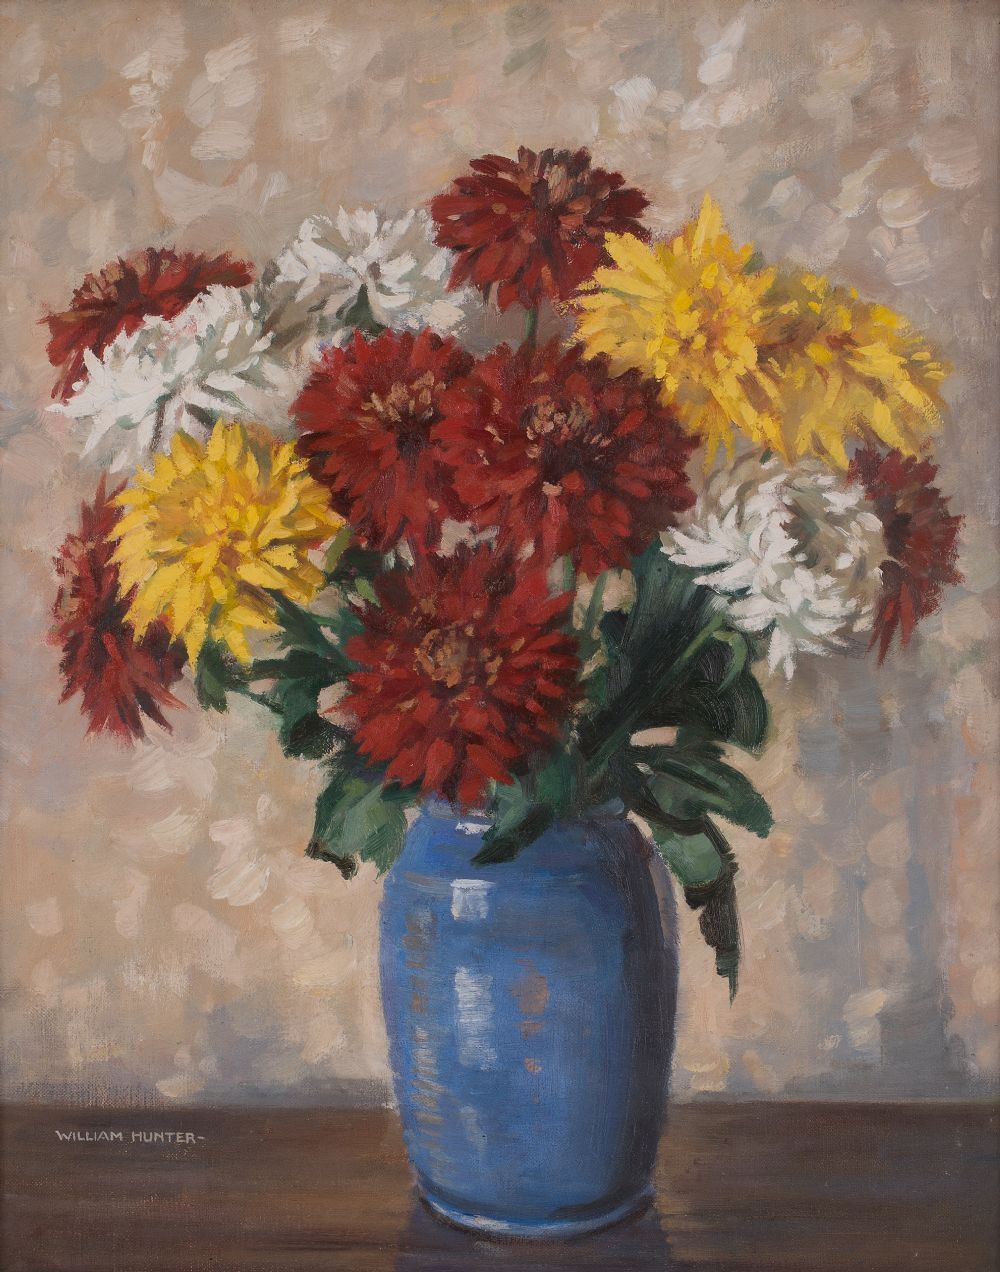 Lot 45 - CHRYSANTHEMUMS IN THE STUDIO by William Hunter ROI, 1890 - 1967